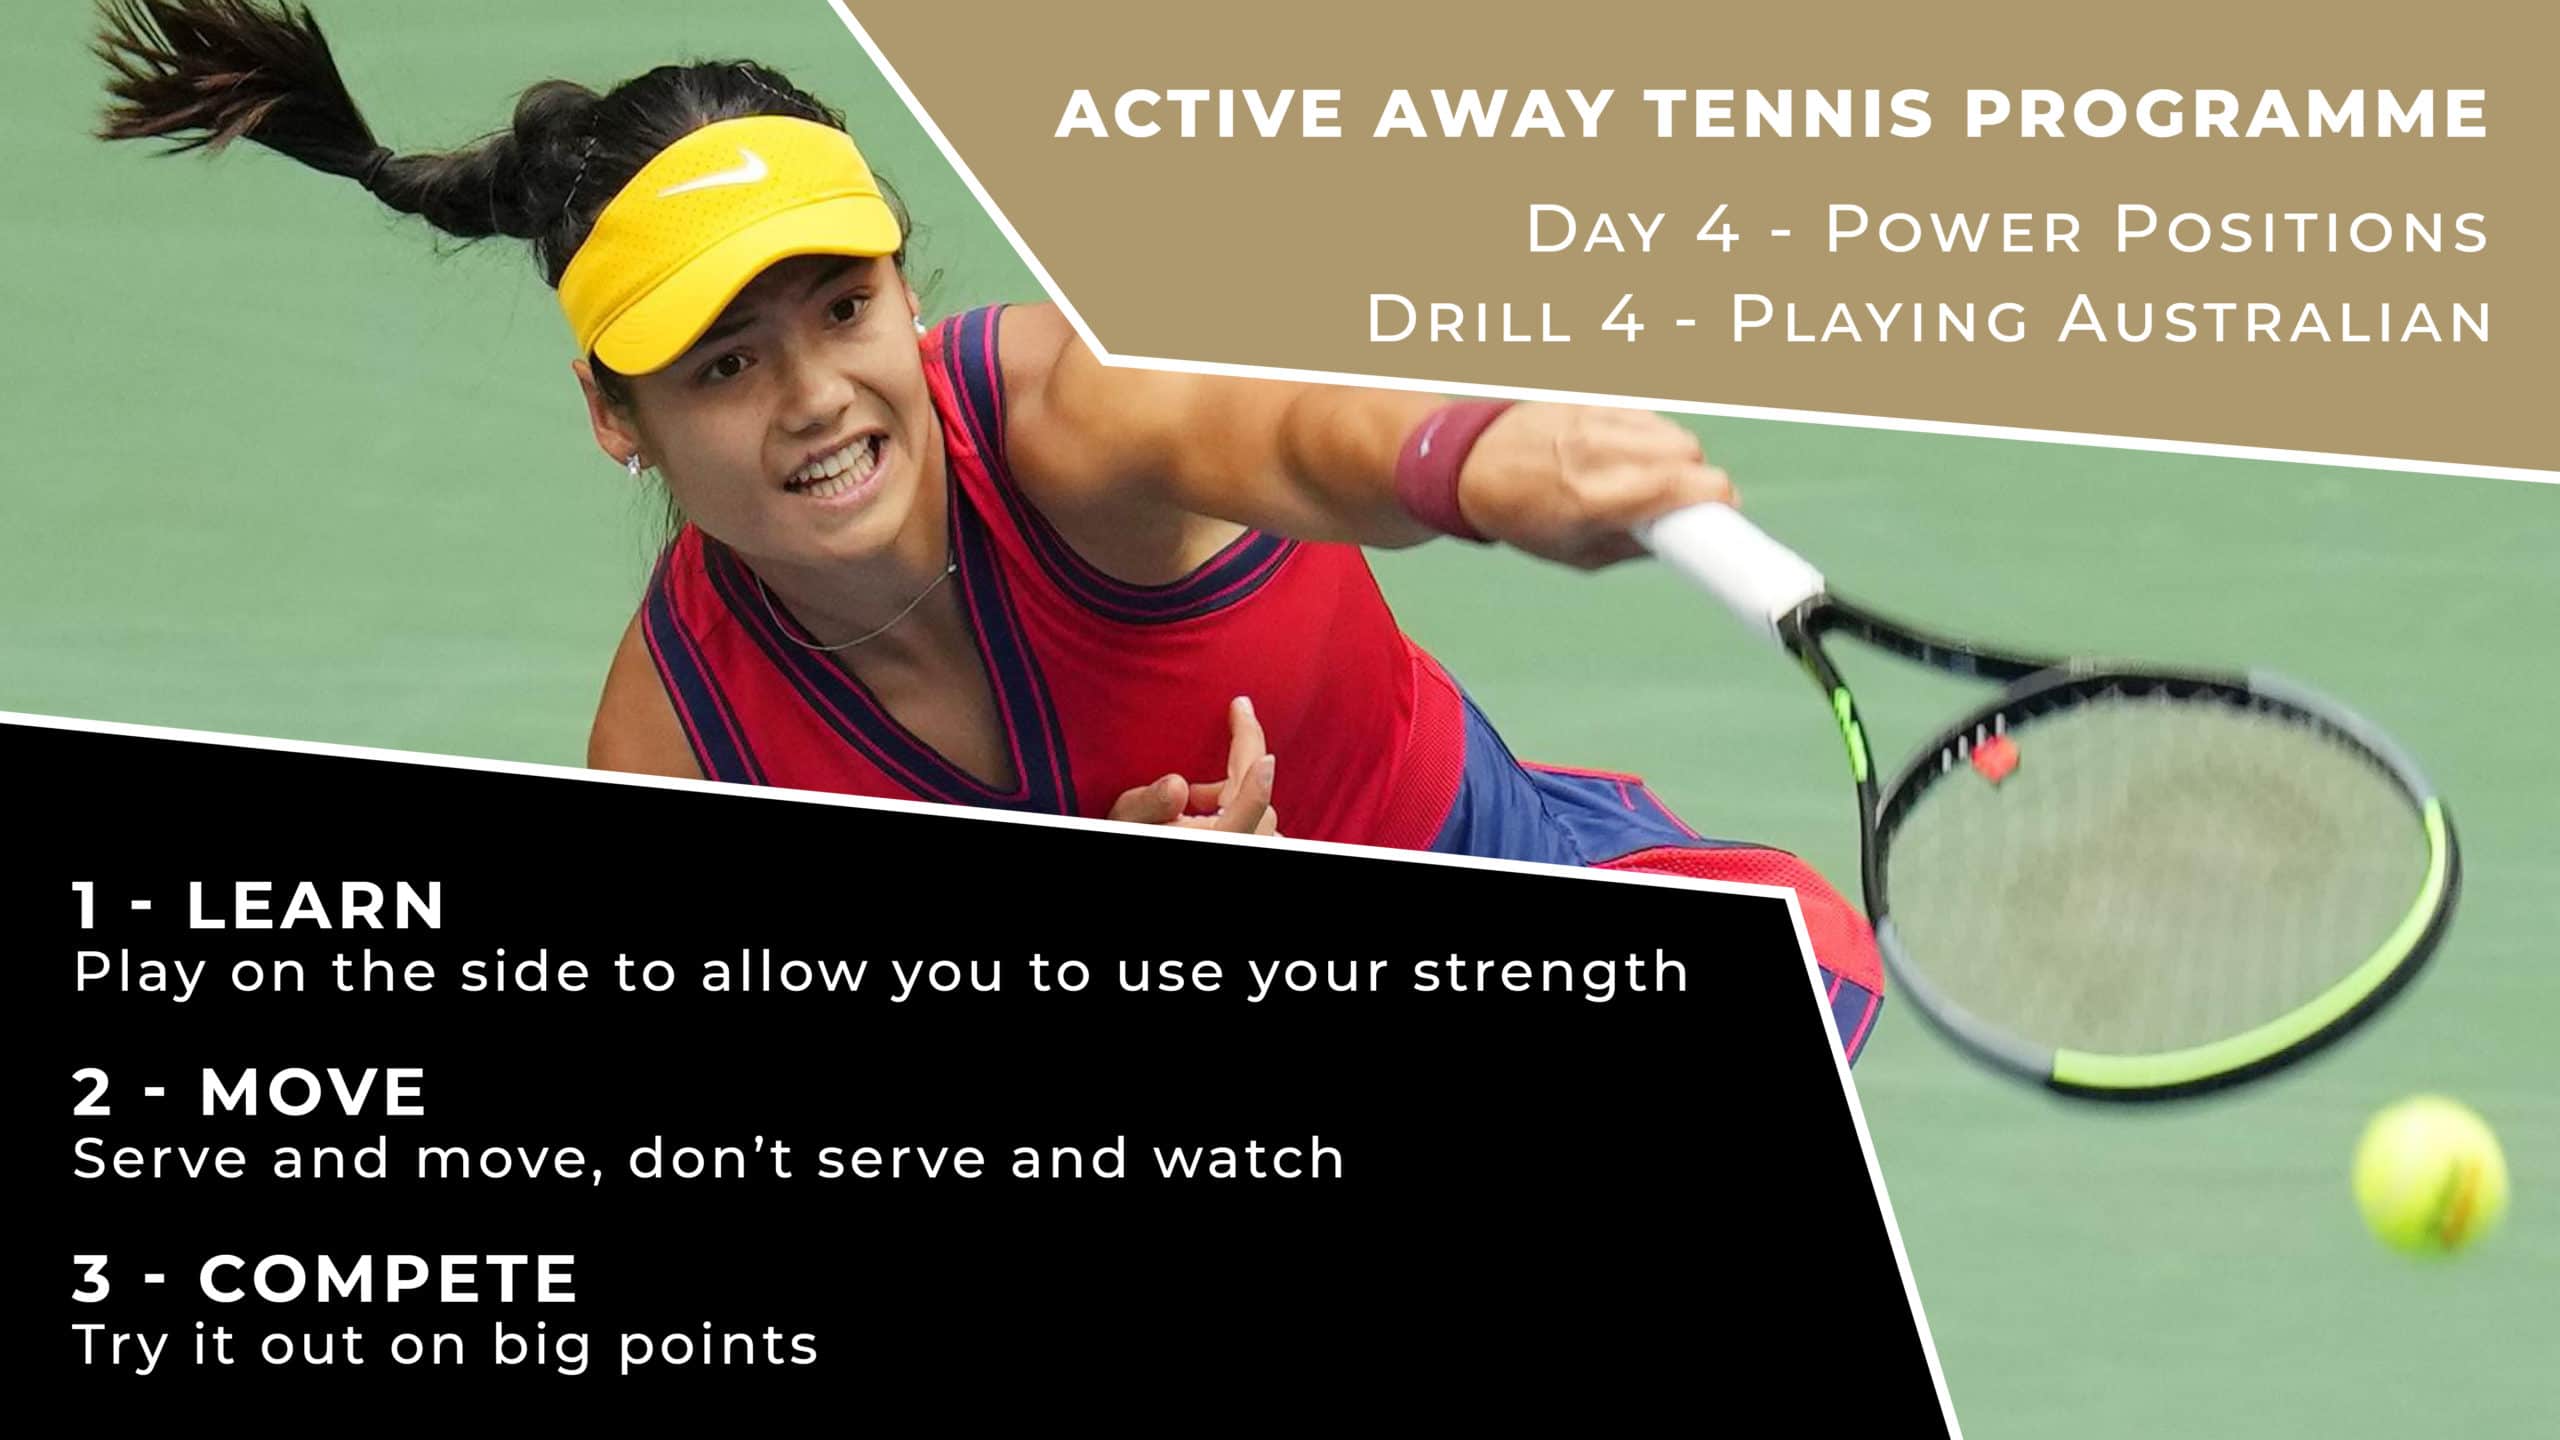 Day 4 - Power Positions Drill 4 - Playing Australian | Active Away Tennis Programme